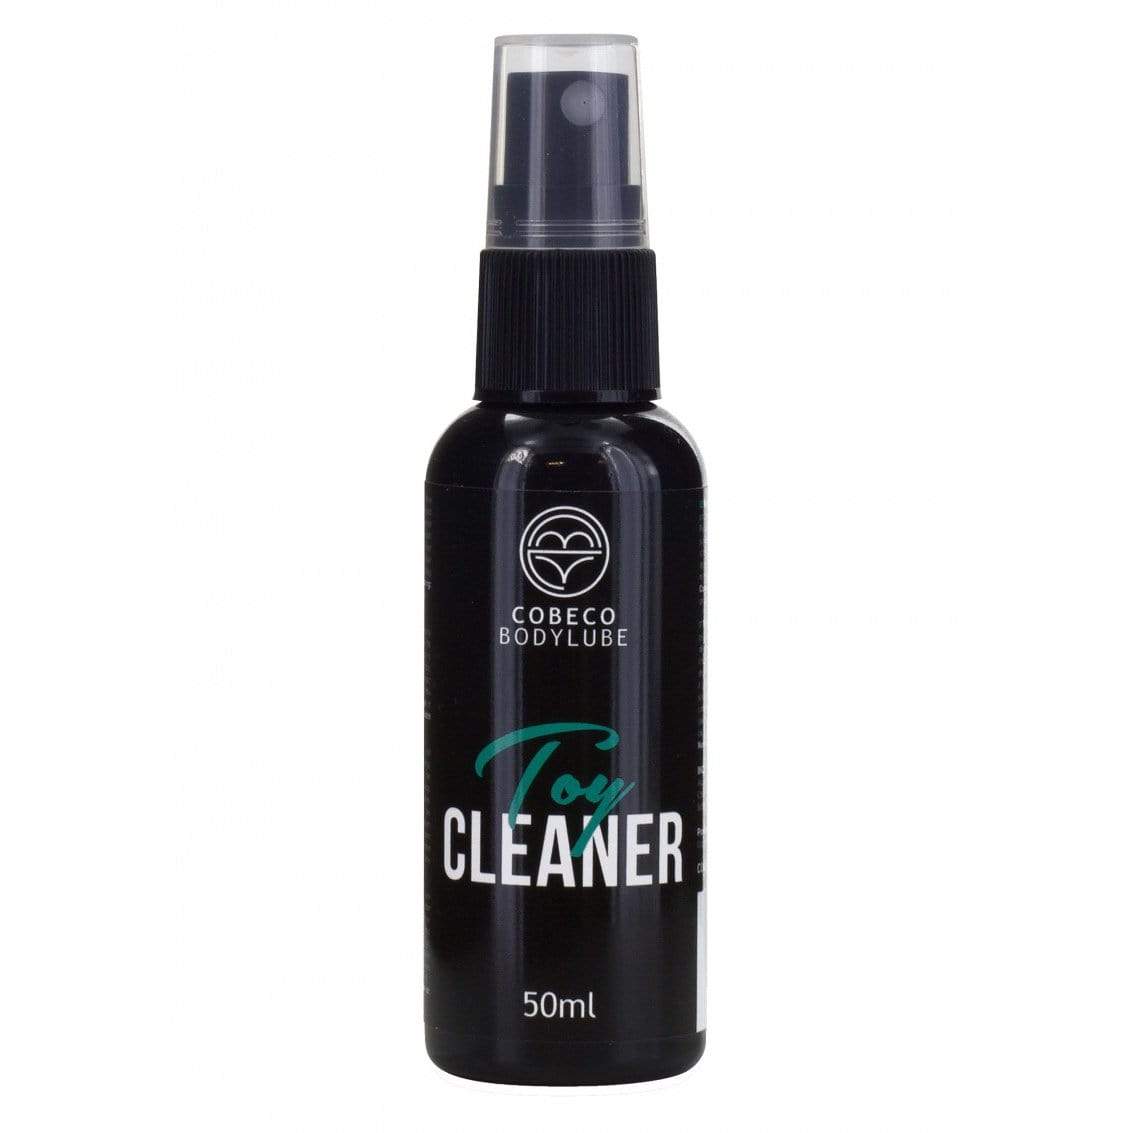 Cobeco Pharma - Toy Cleaner  50ml 8718546542671 Toy Cleaners